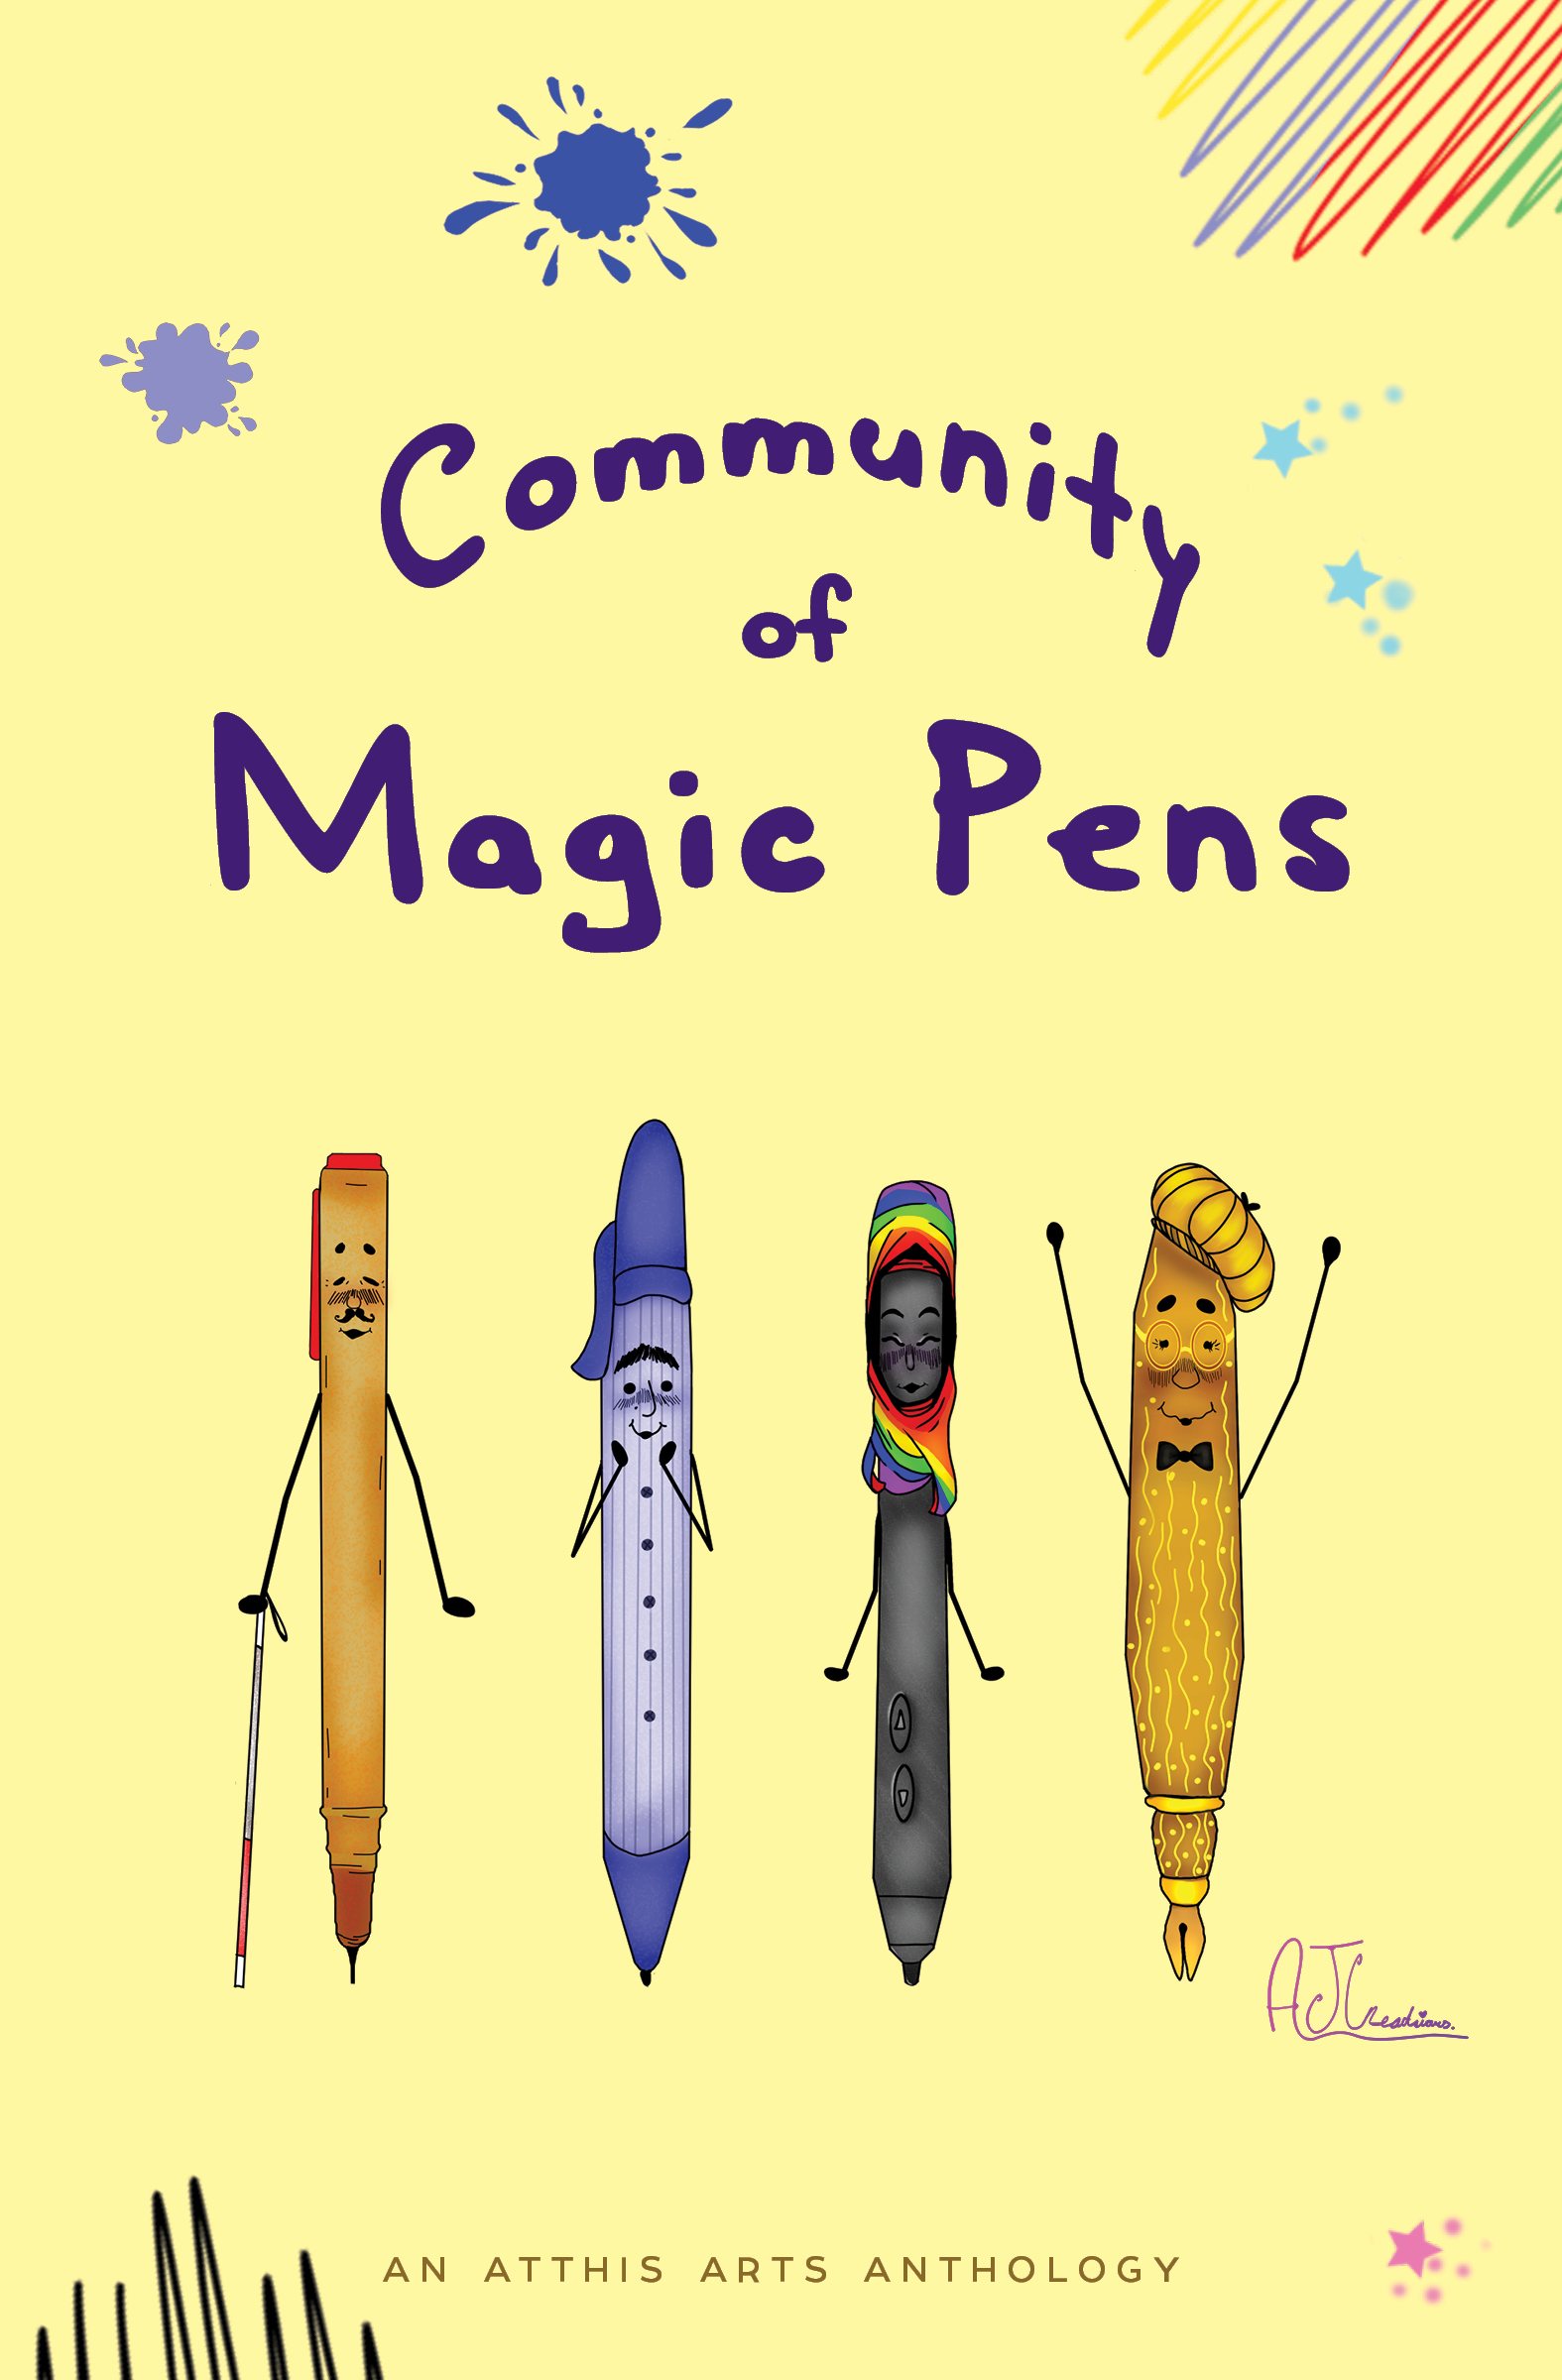 Book cover featuring anthropomorphic pens beneath the title. One pen holds a cane for the blind